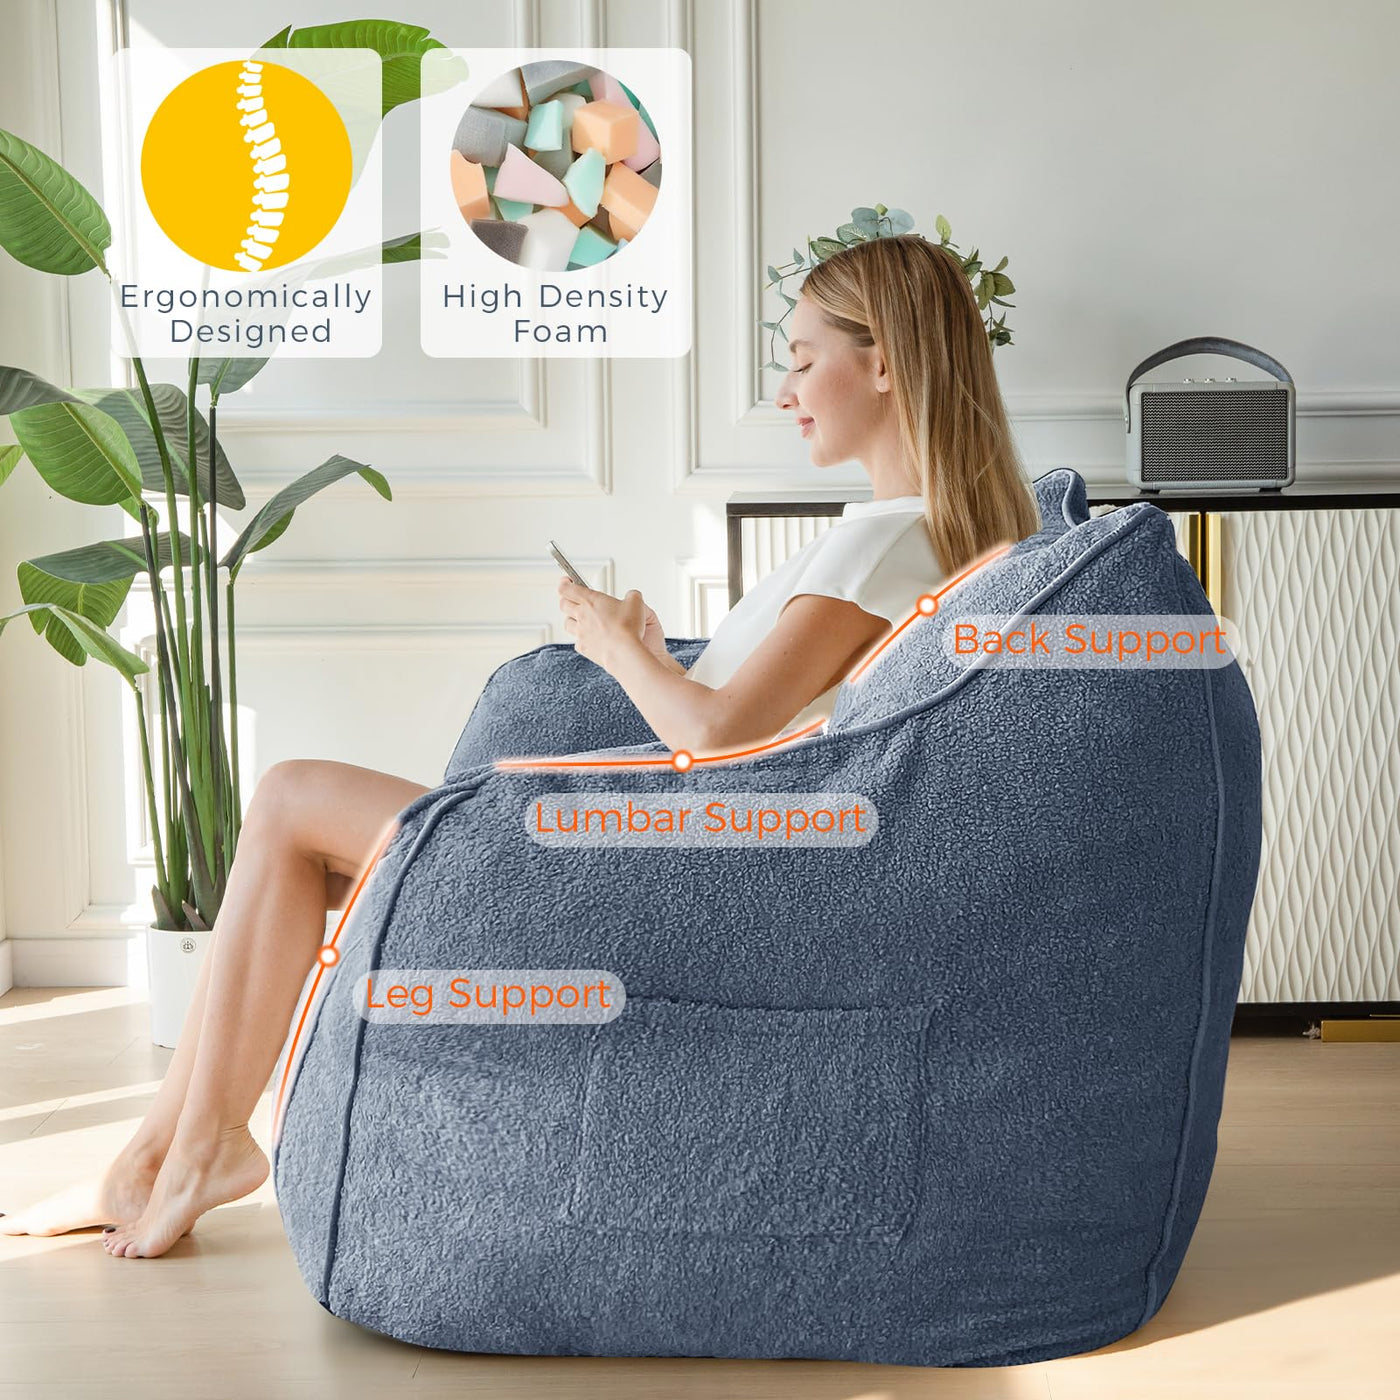 MAXYOYO Giant Bean Bag Chair for Adults, Large Fluffy Bean Bag Couch for Living Room with Decorative Edges, Dusty Blue